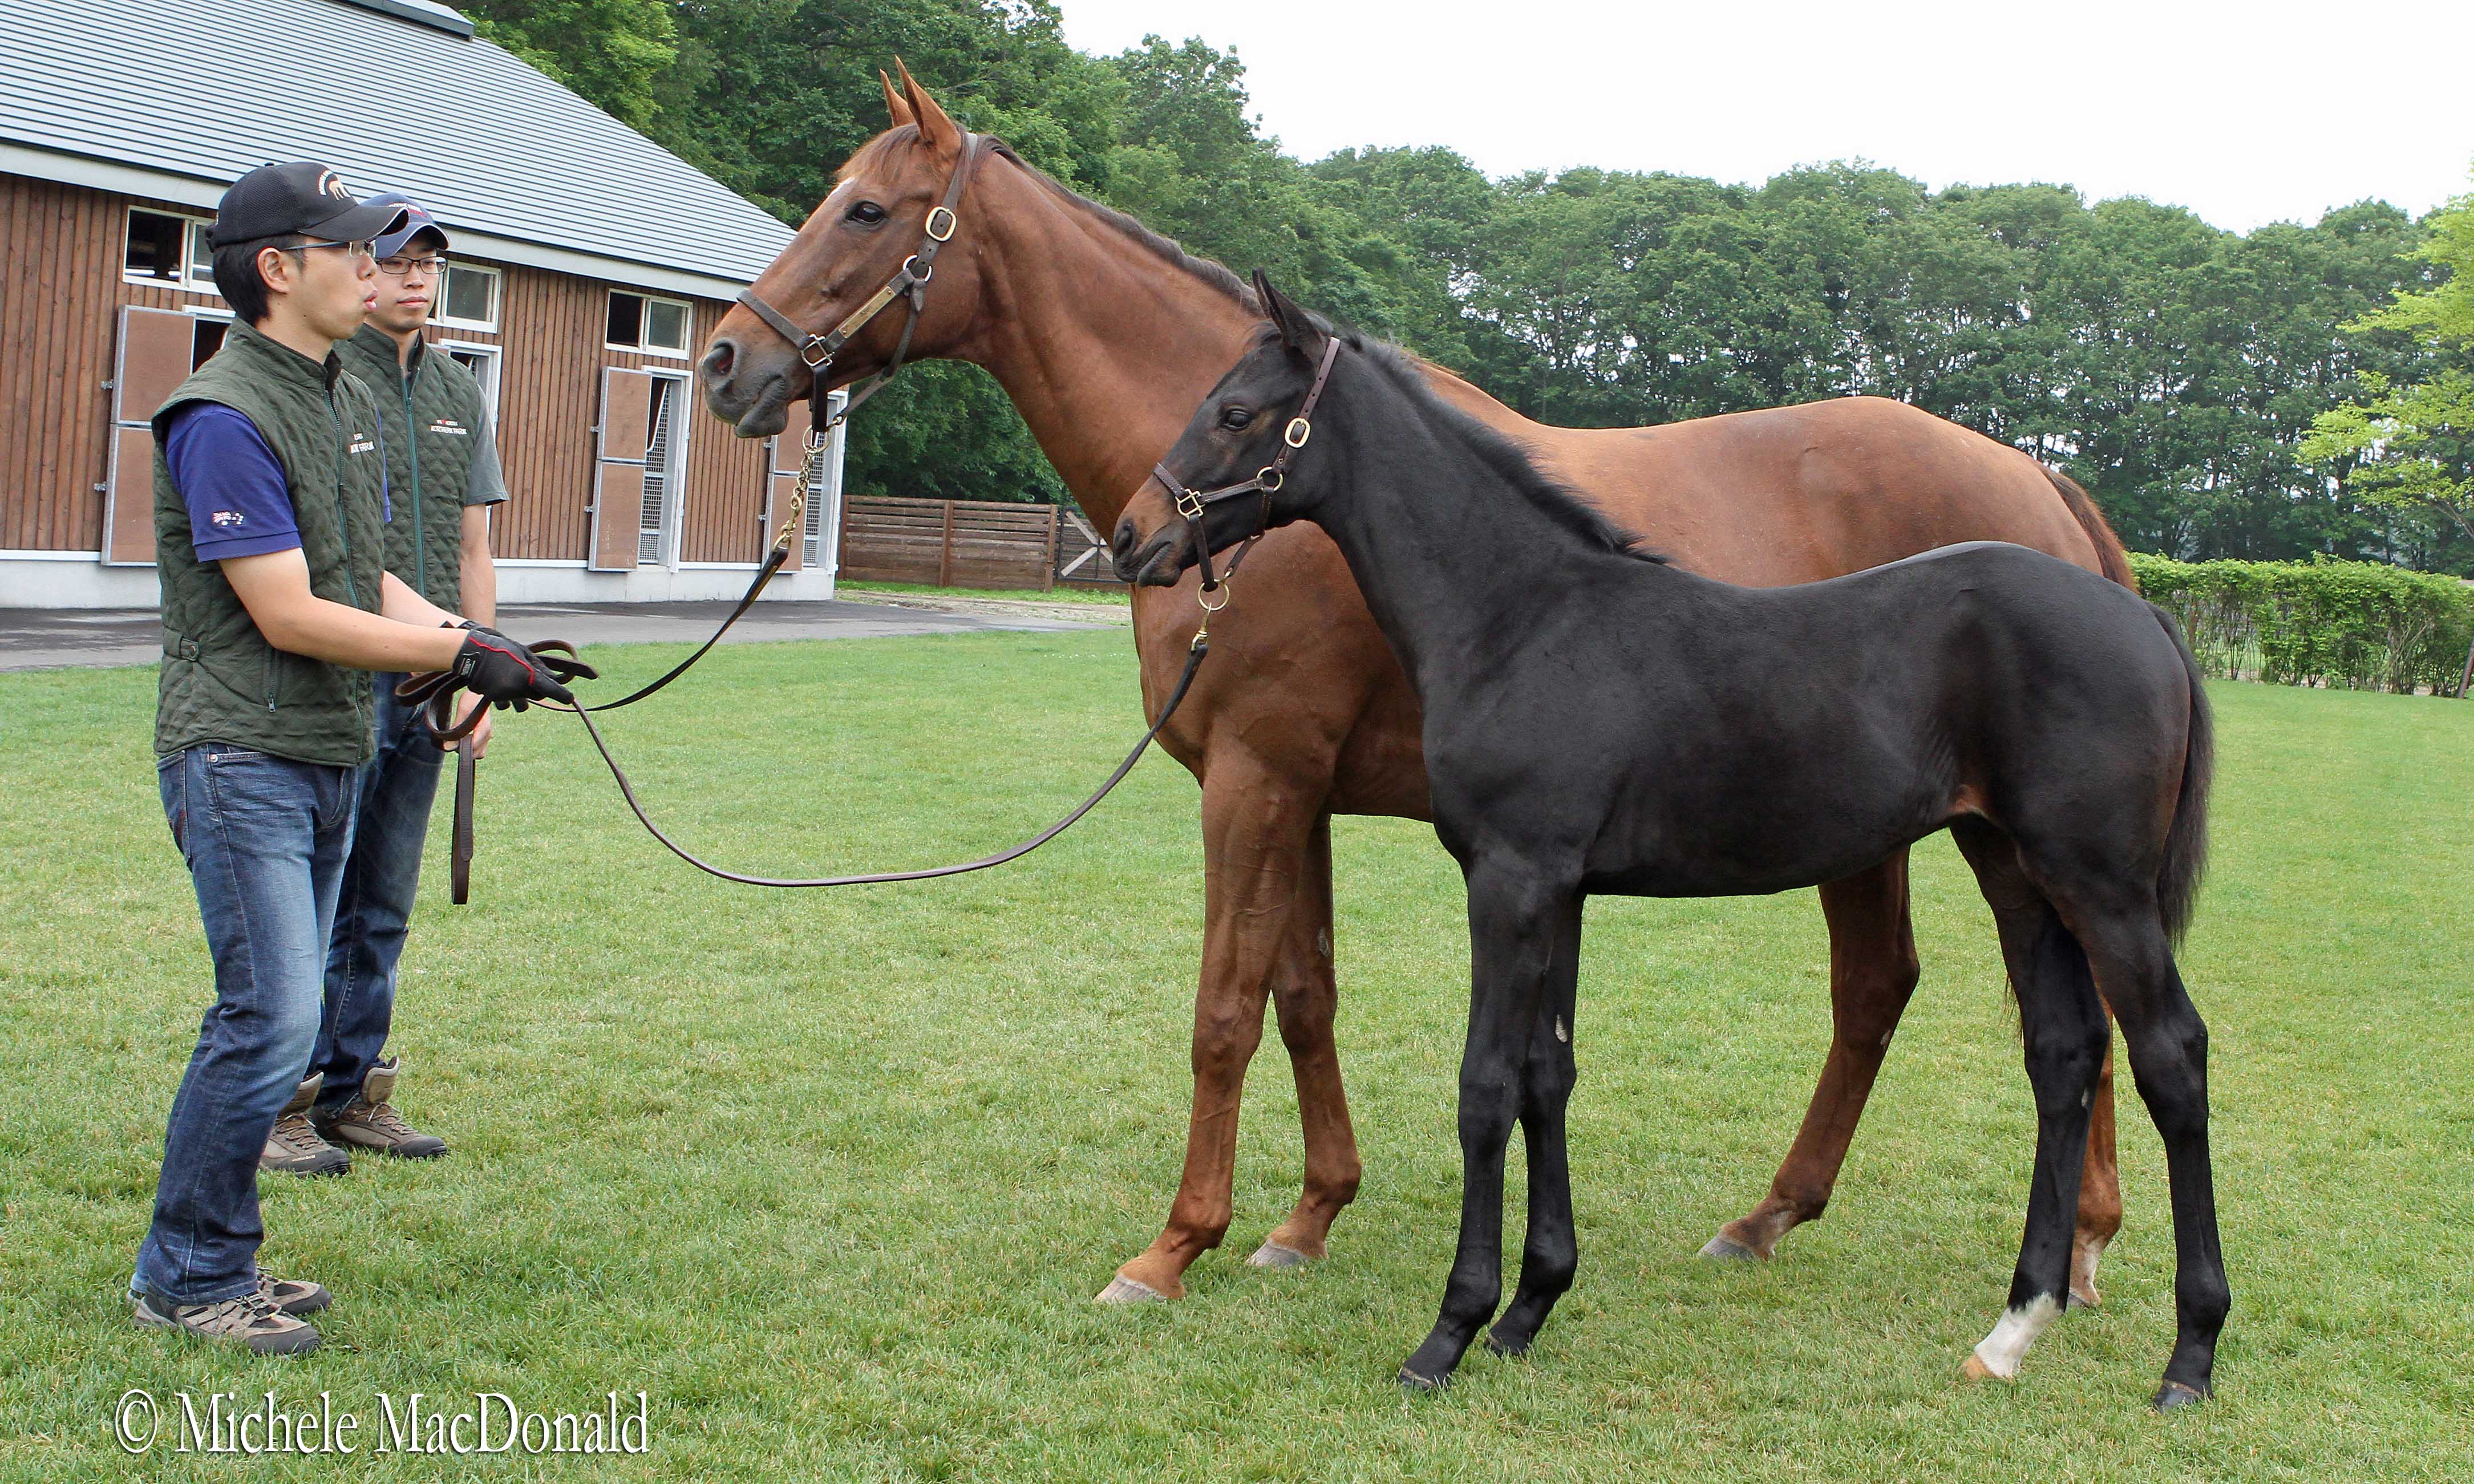 Mother and son: Azeri in 2013 with that year’s offspring, a Deep Impact colt, who was sold for $2.35 million and, now called Leukerbad, has performed with credit on the racetrack. Photo: Michele MacDonald